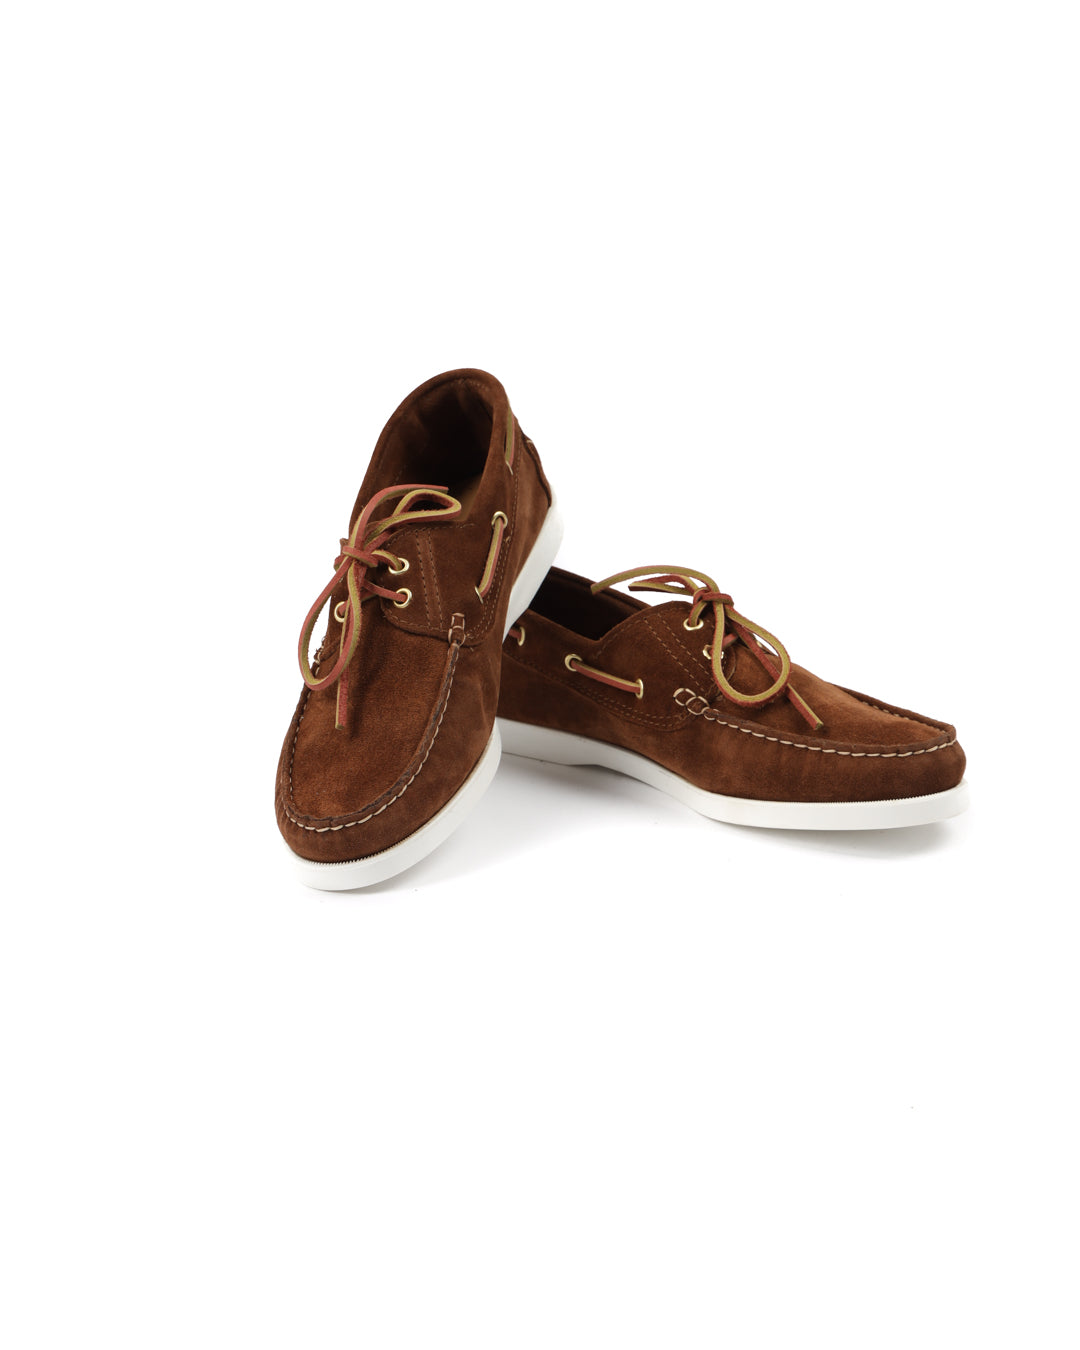 Jimmy - suede tobacco boat